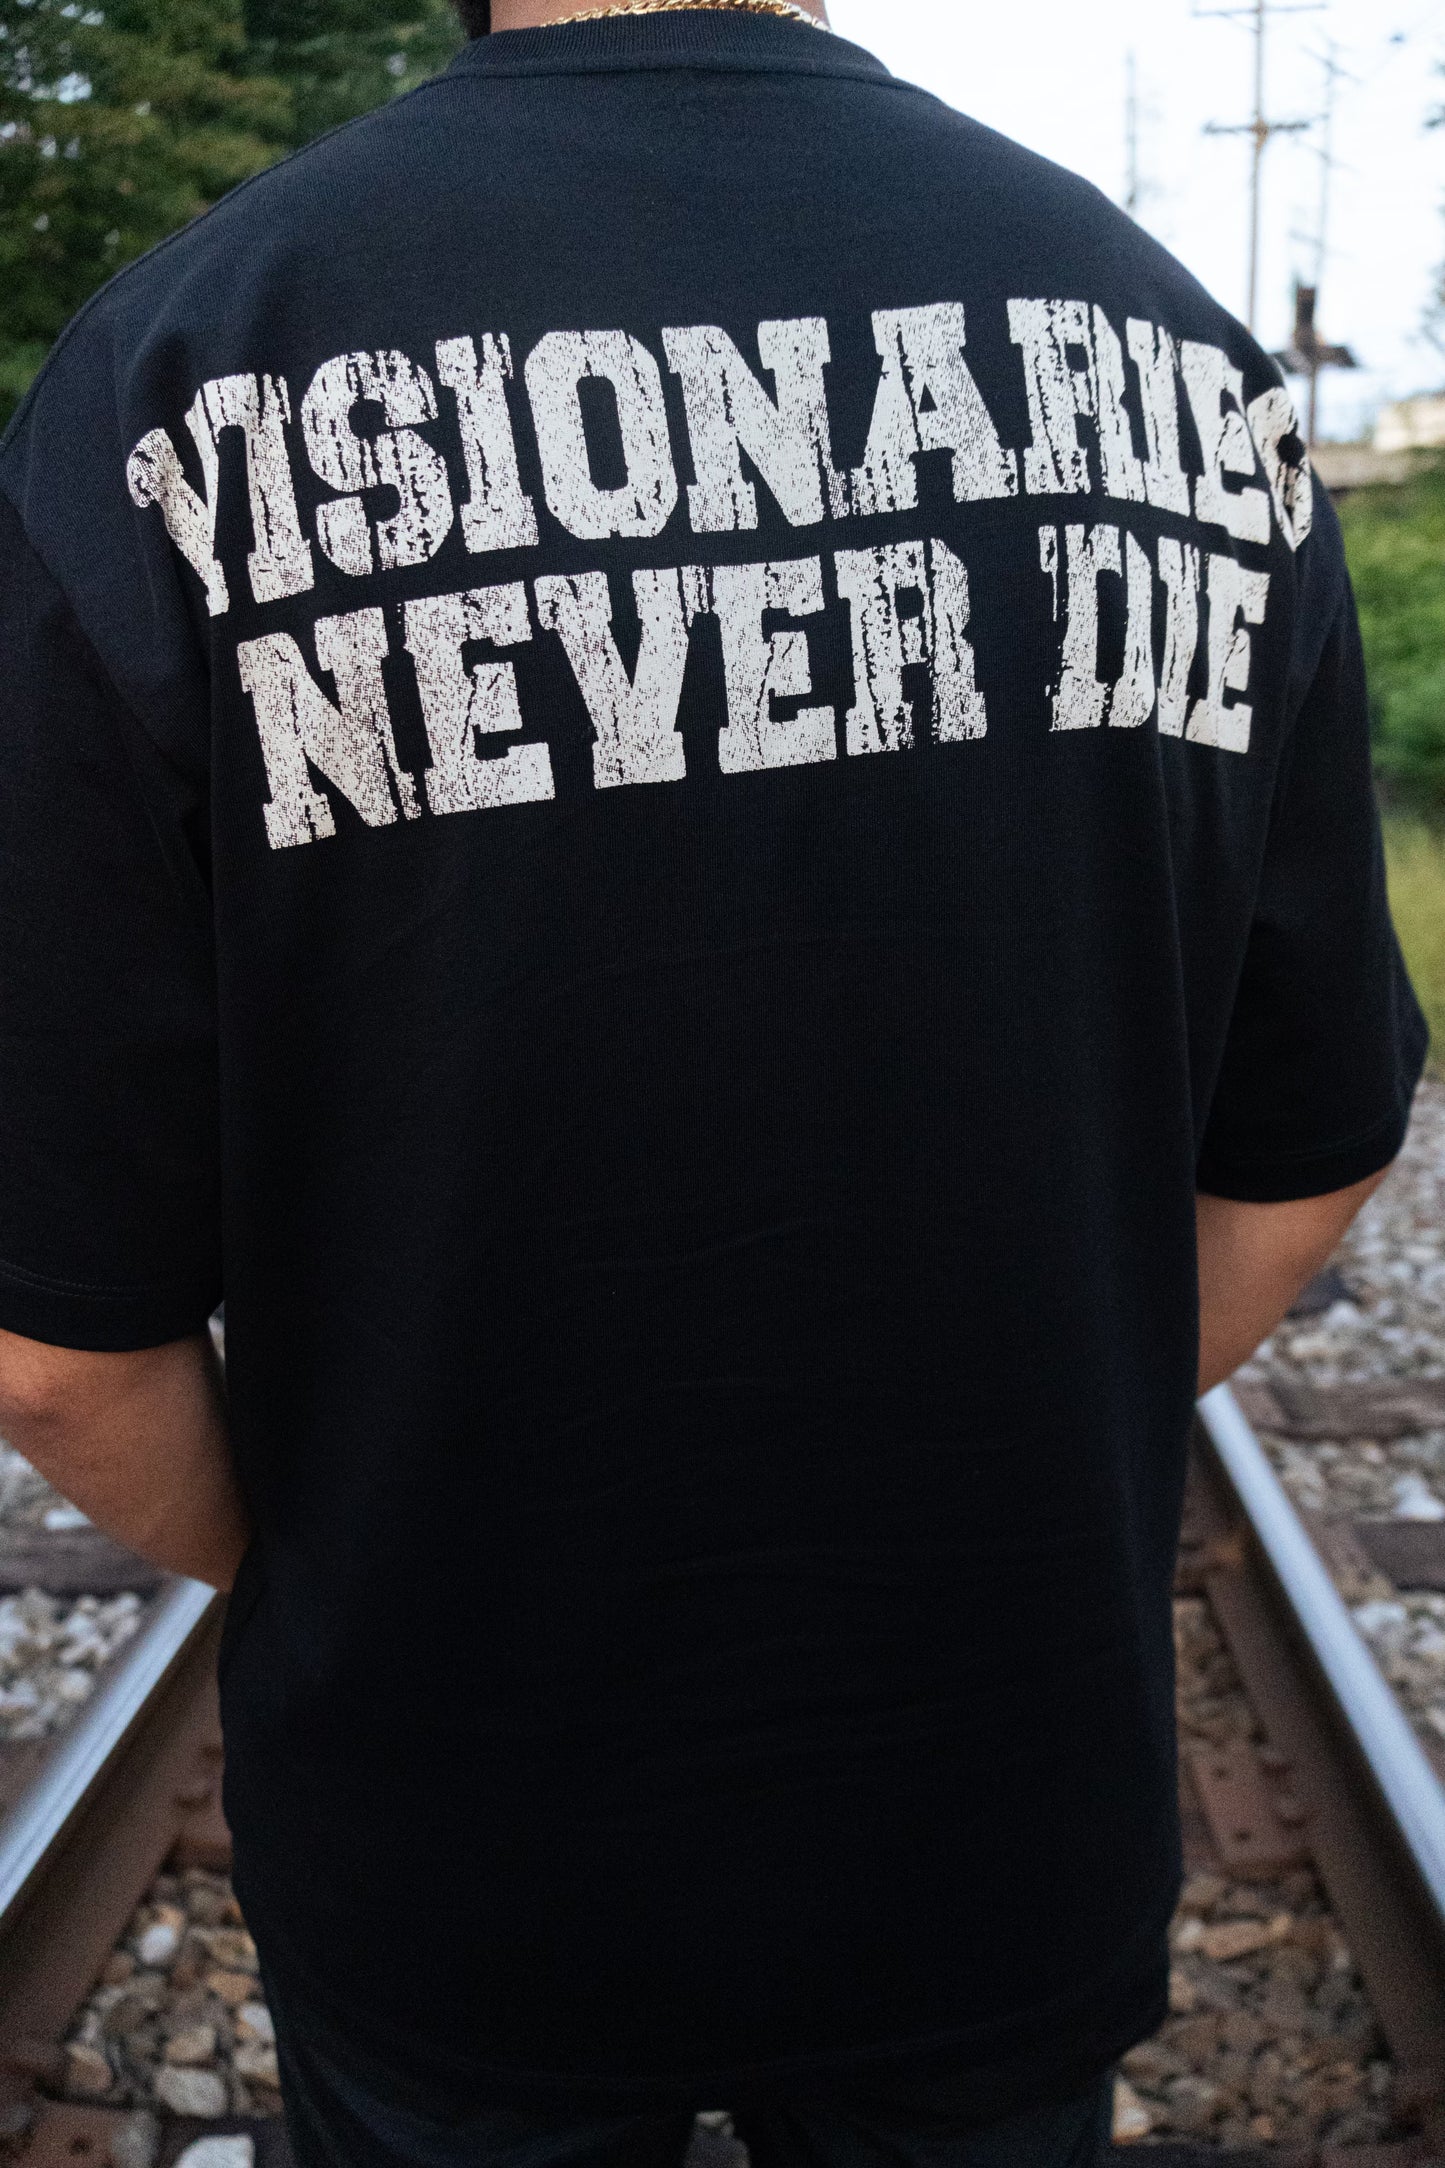 Visionary Dept. Tee